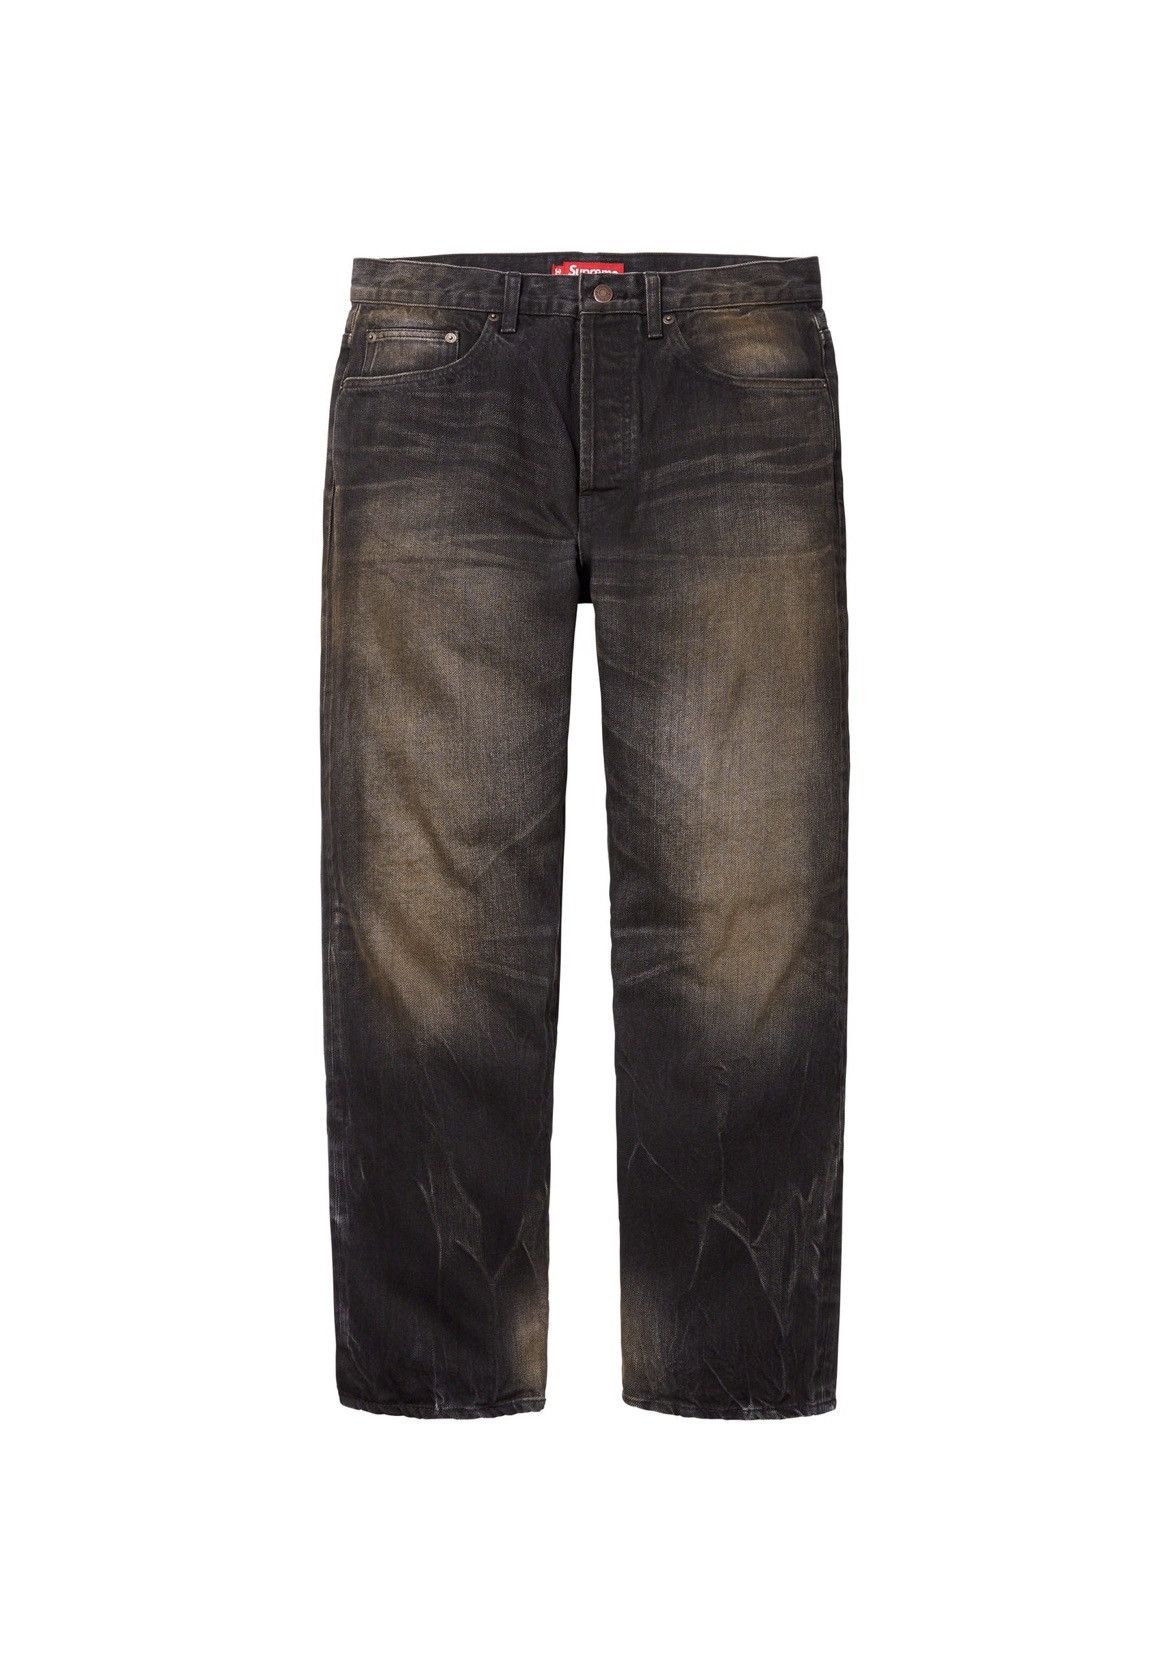 Supreme Distressed Loose Fit Selvedge Jean Washed blue 30 Yahoo ...